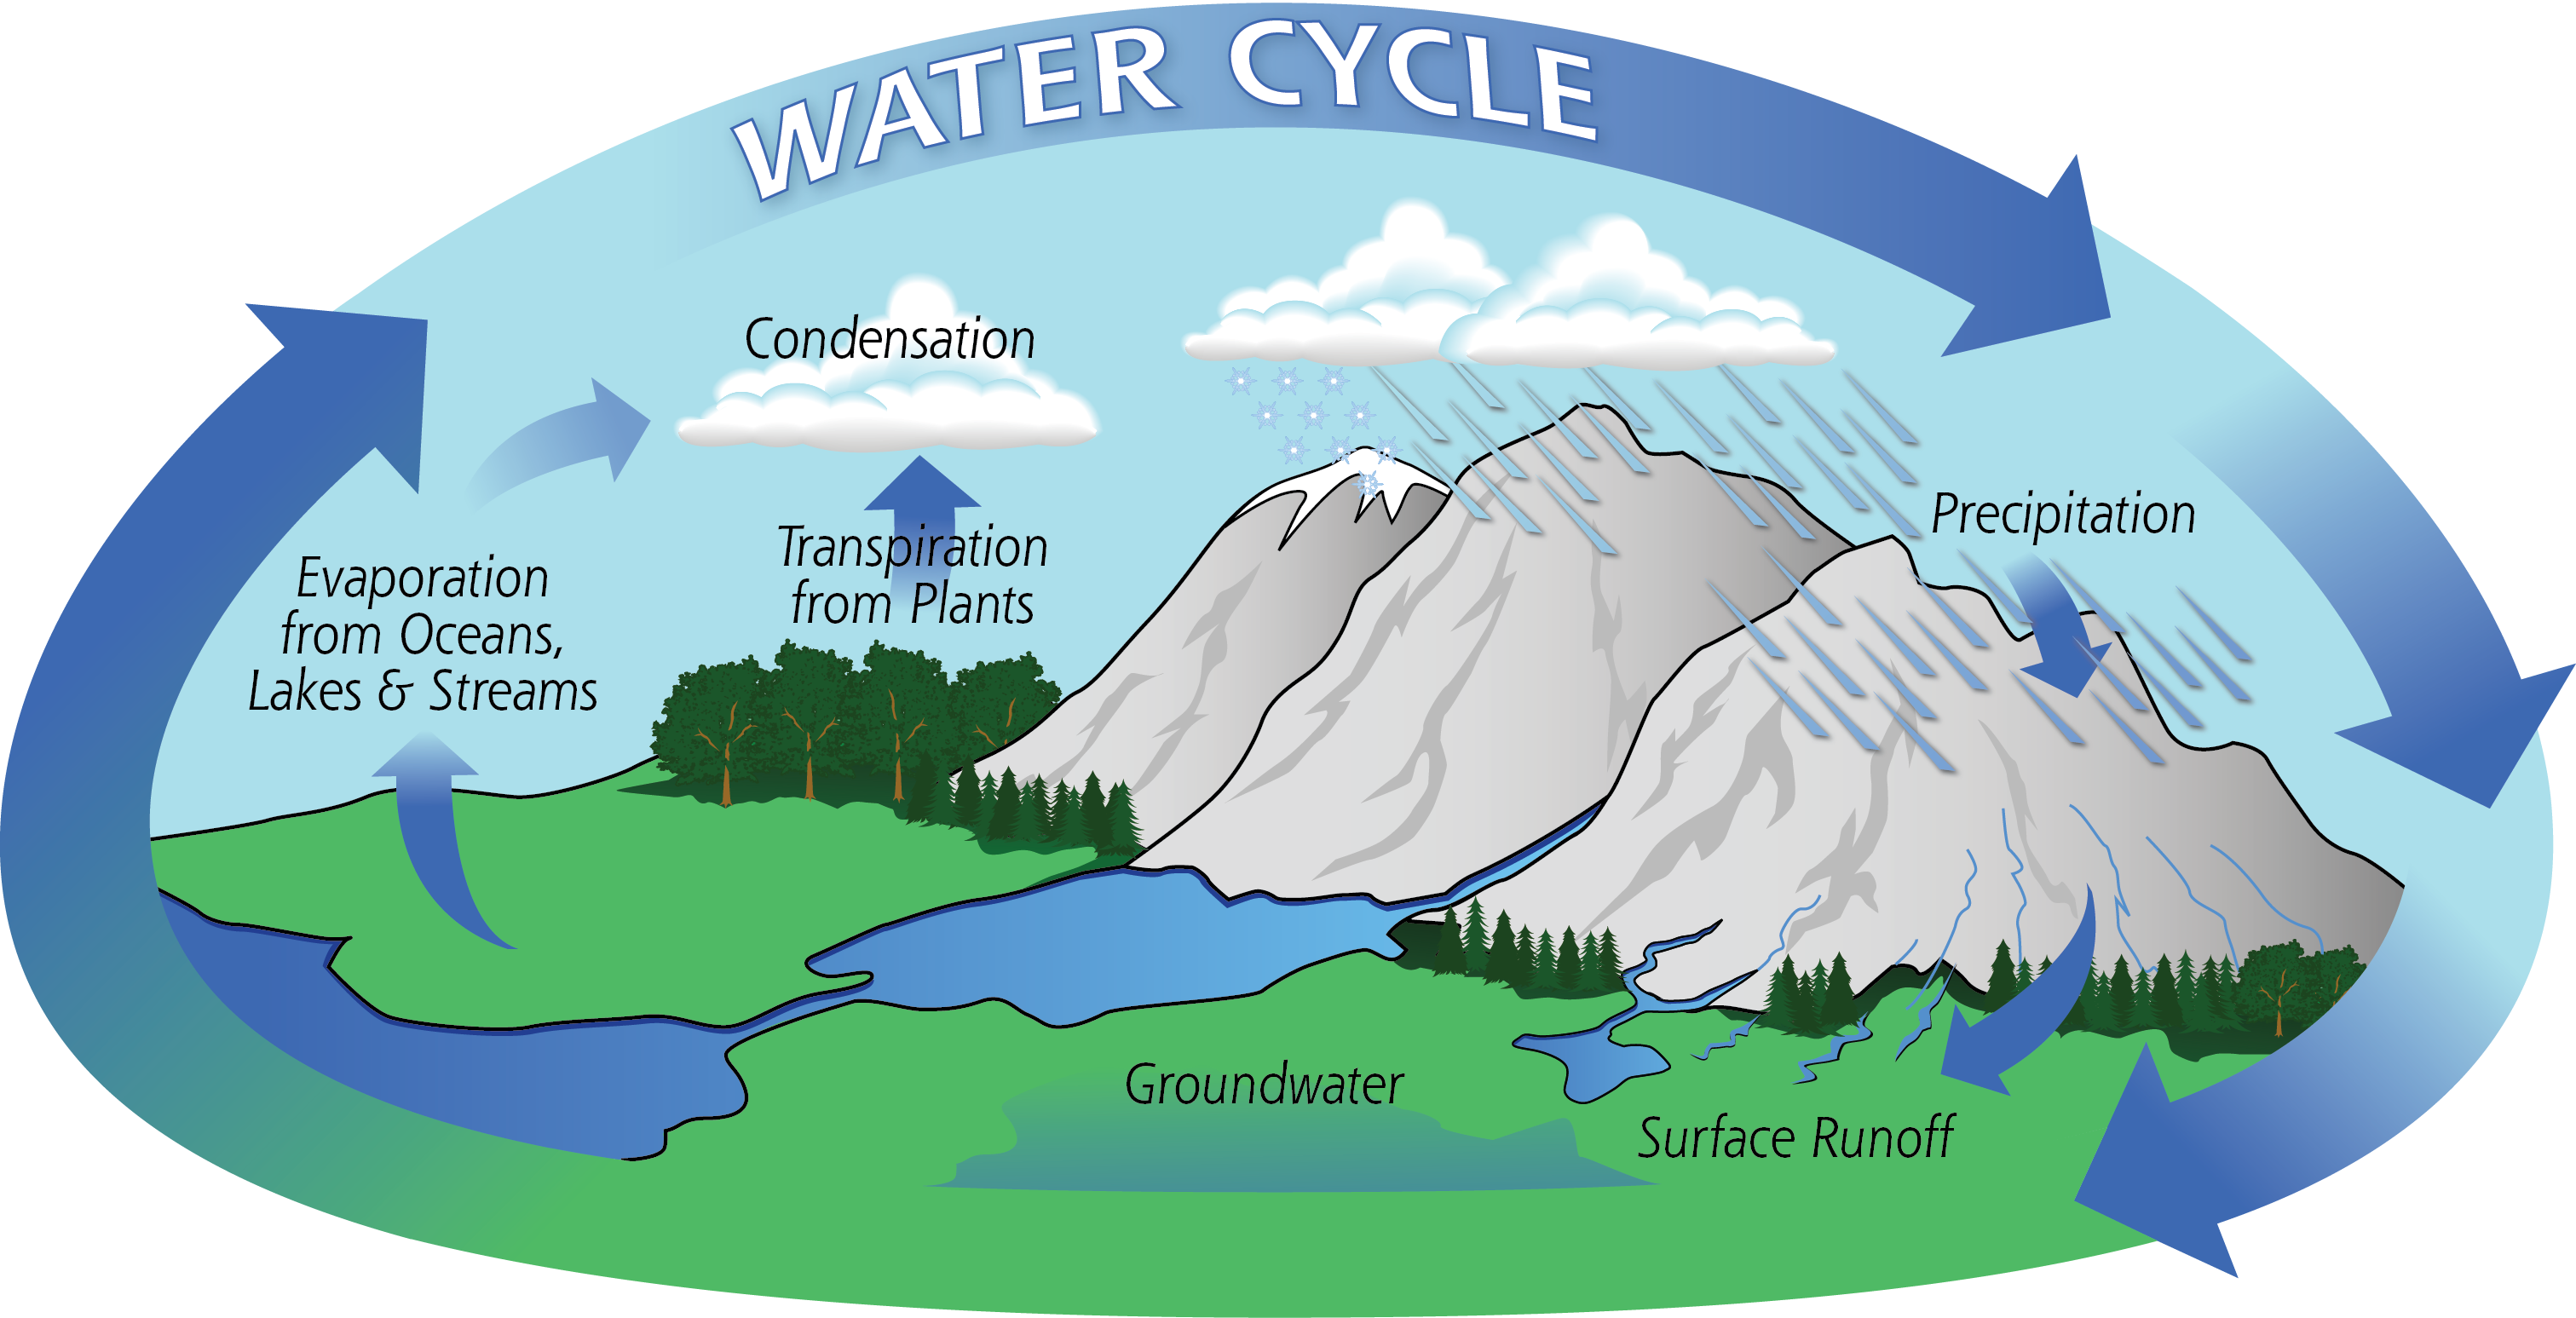 The life cycle of water